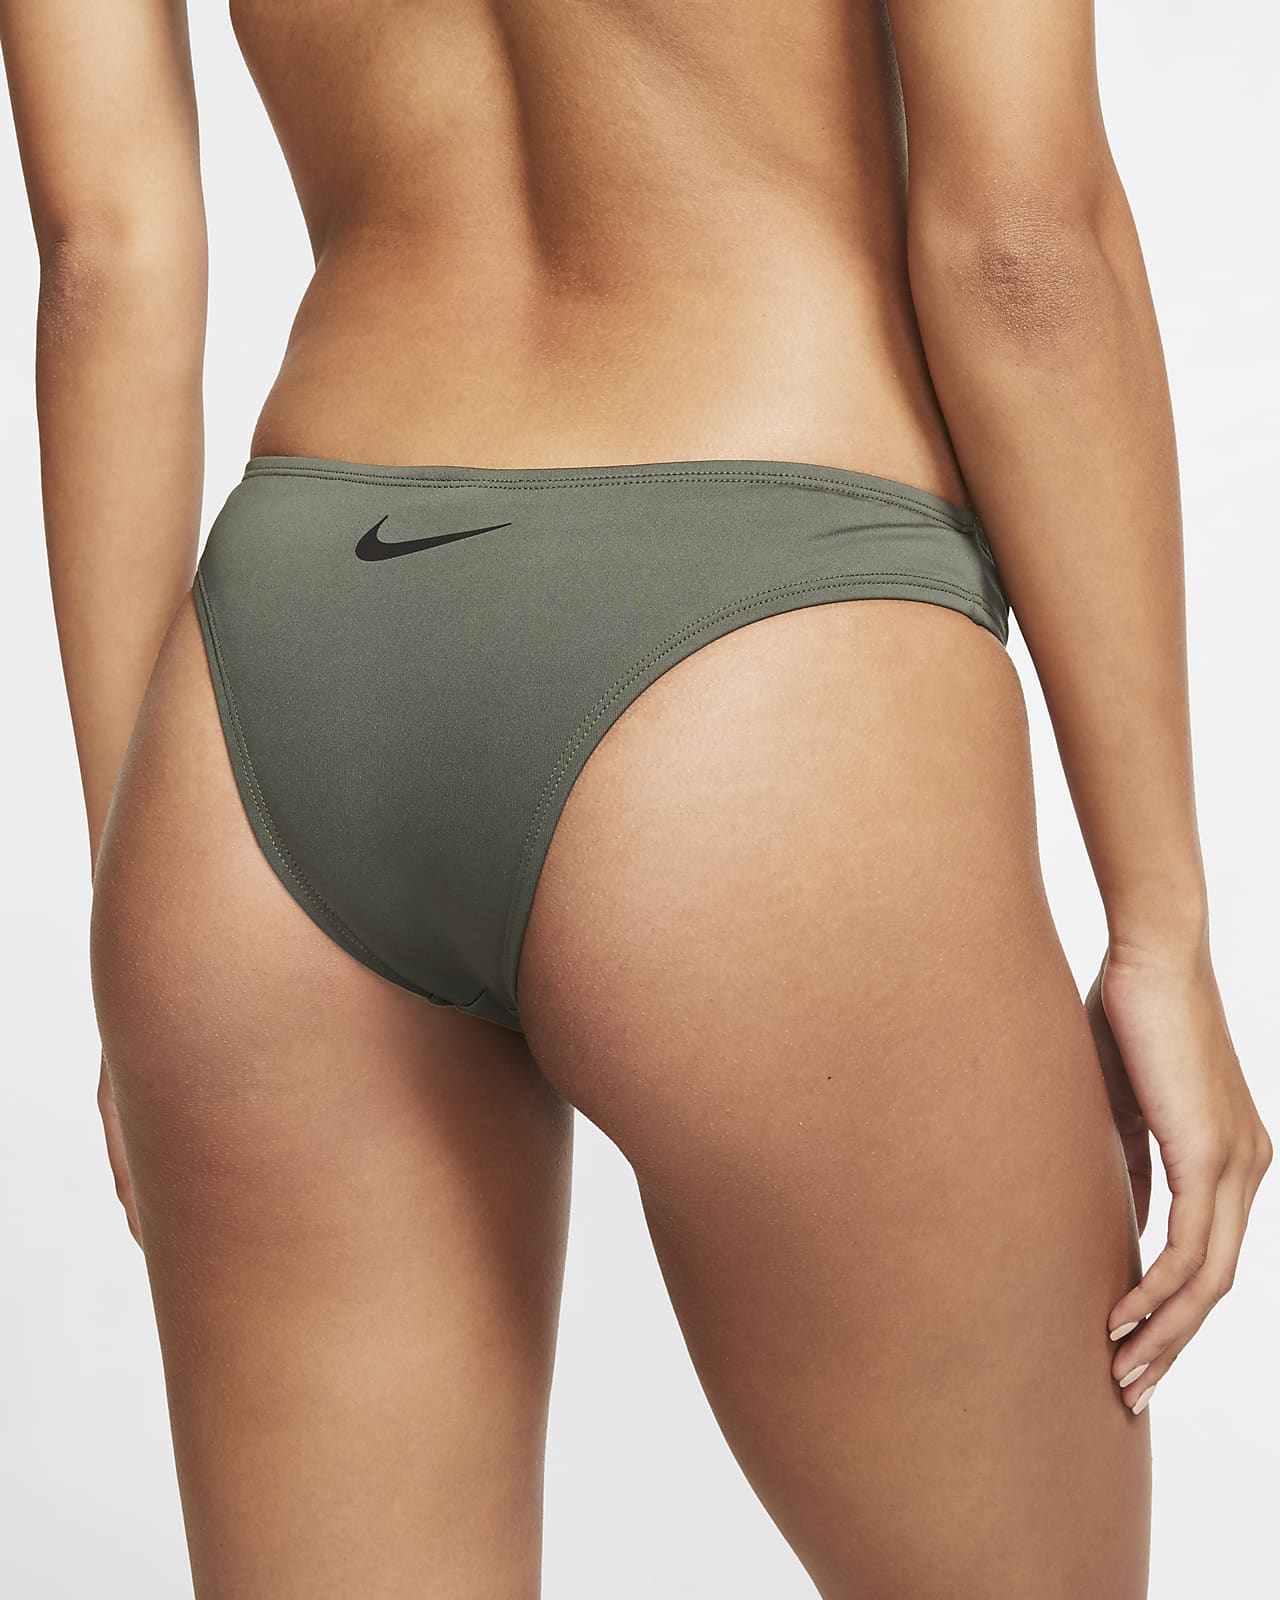 nike beach volleyball swimsuits